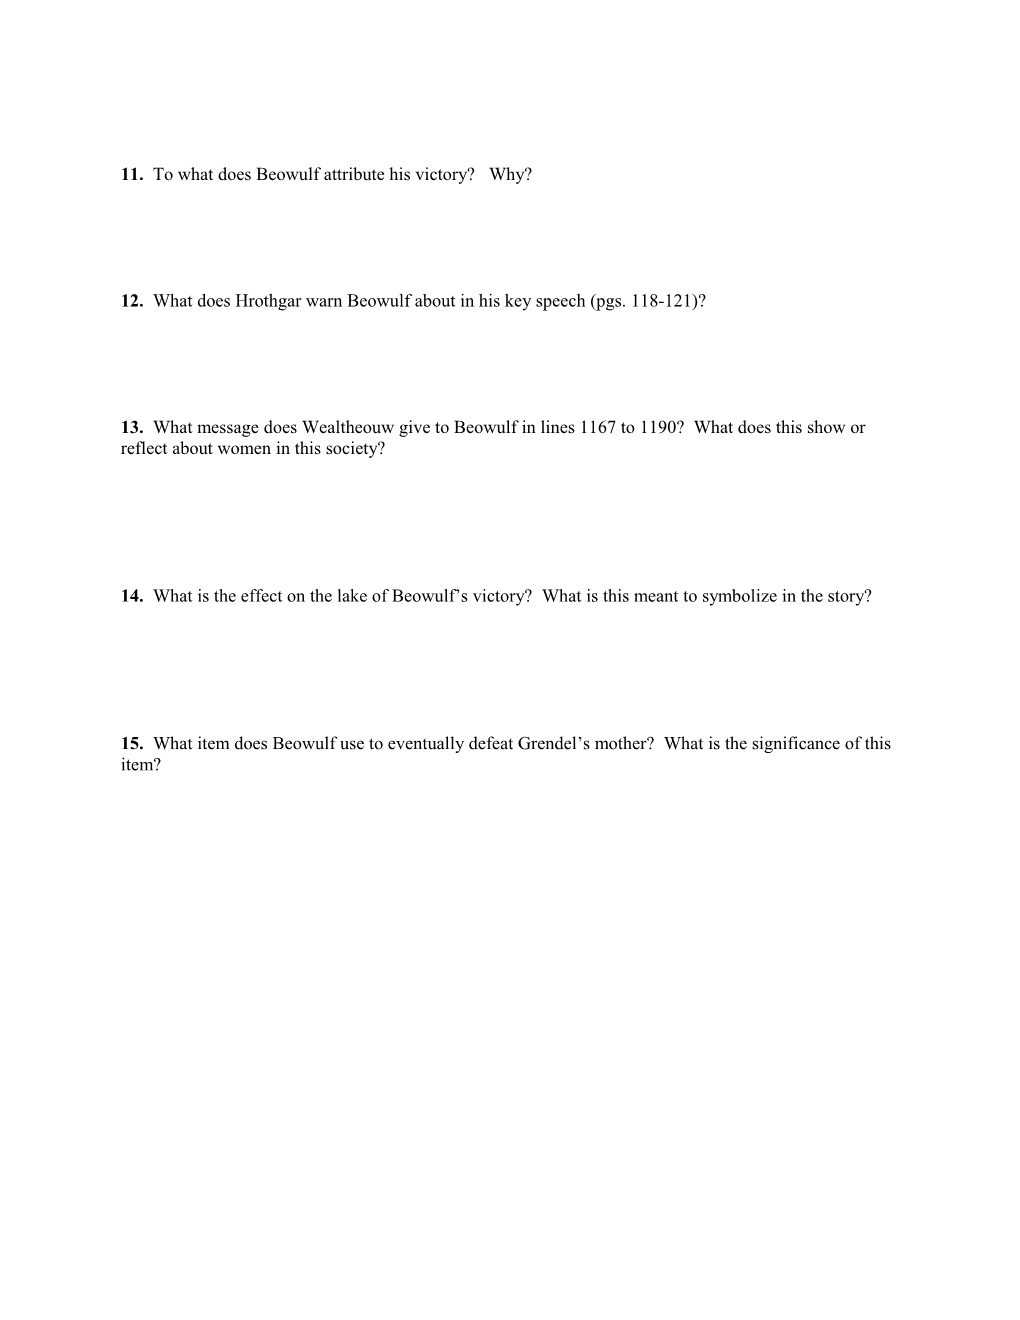 Reading Comprehension Questions Part 2 of Beowulf